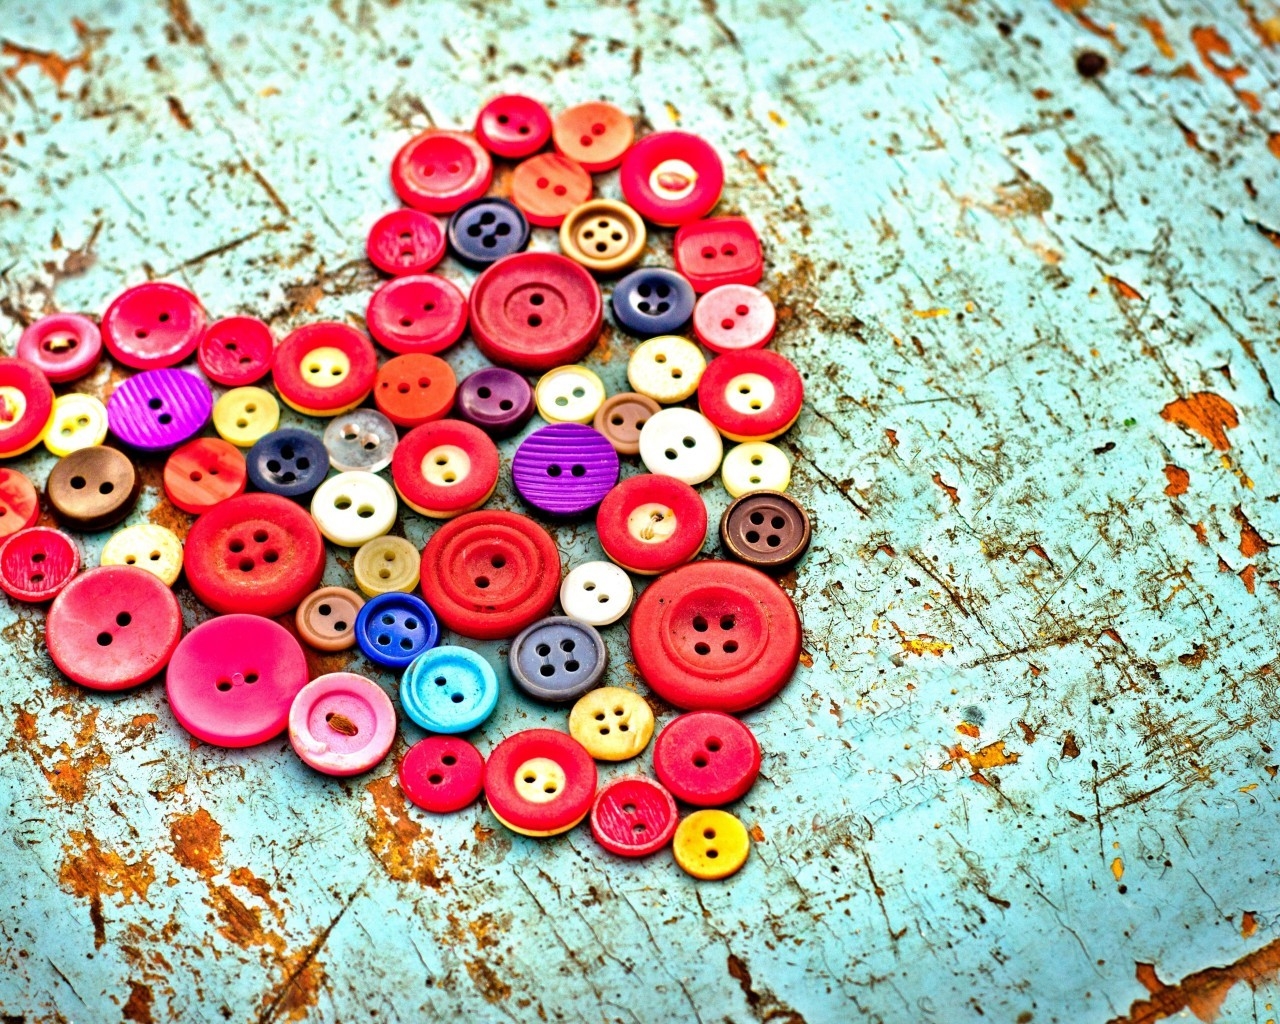 Buttons Heart for 1280 x 1024 resolution